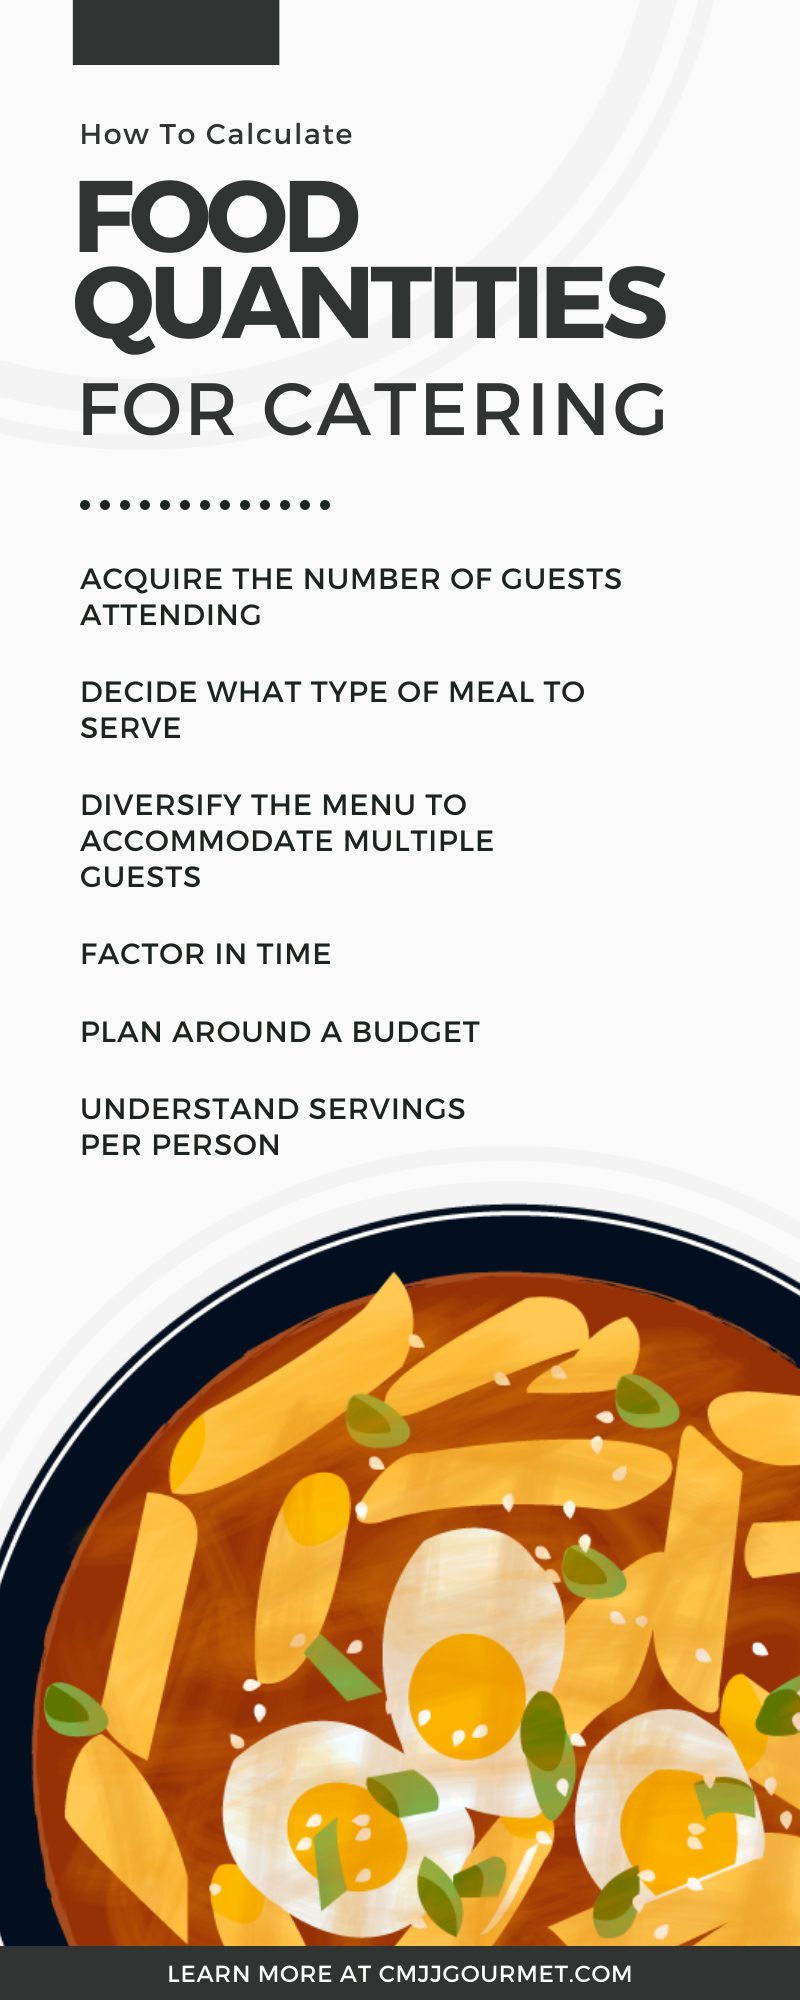 How To Calculate Food Quantities for Catering